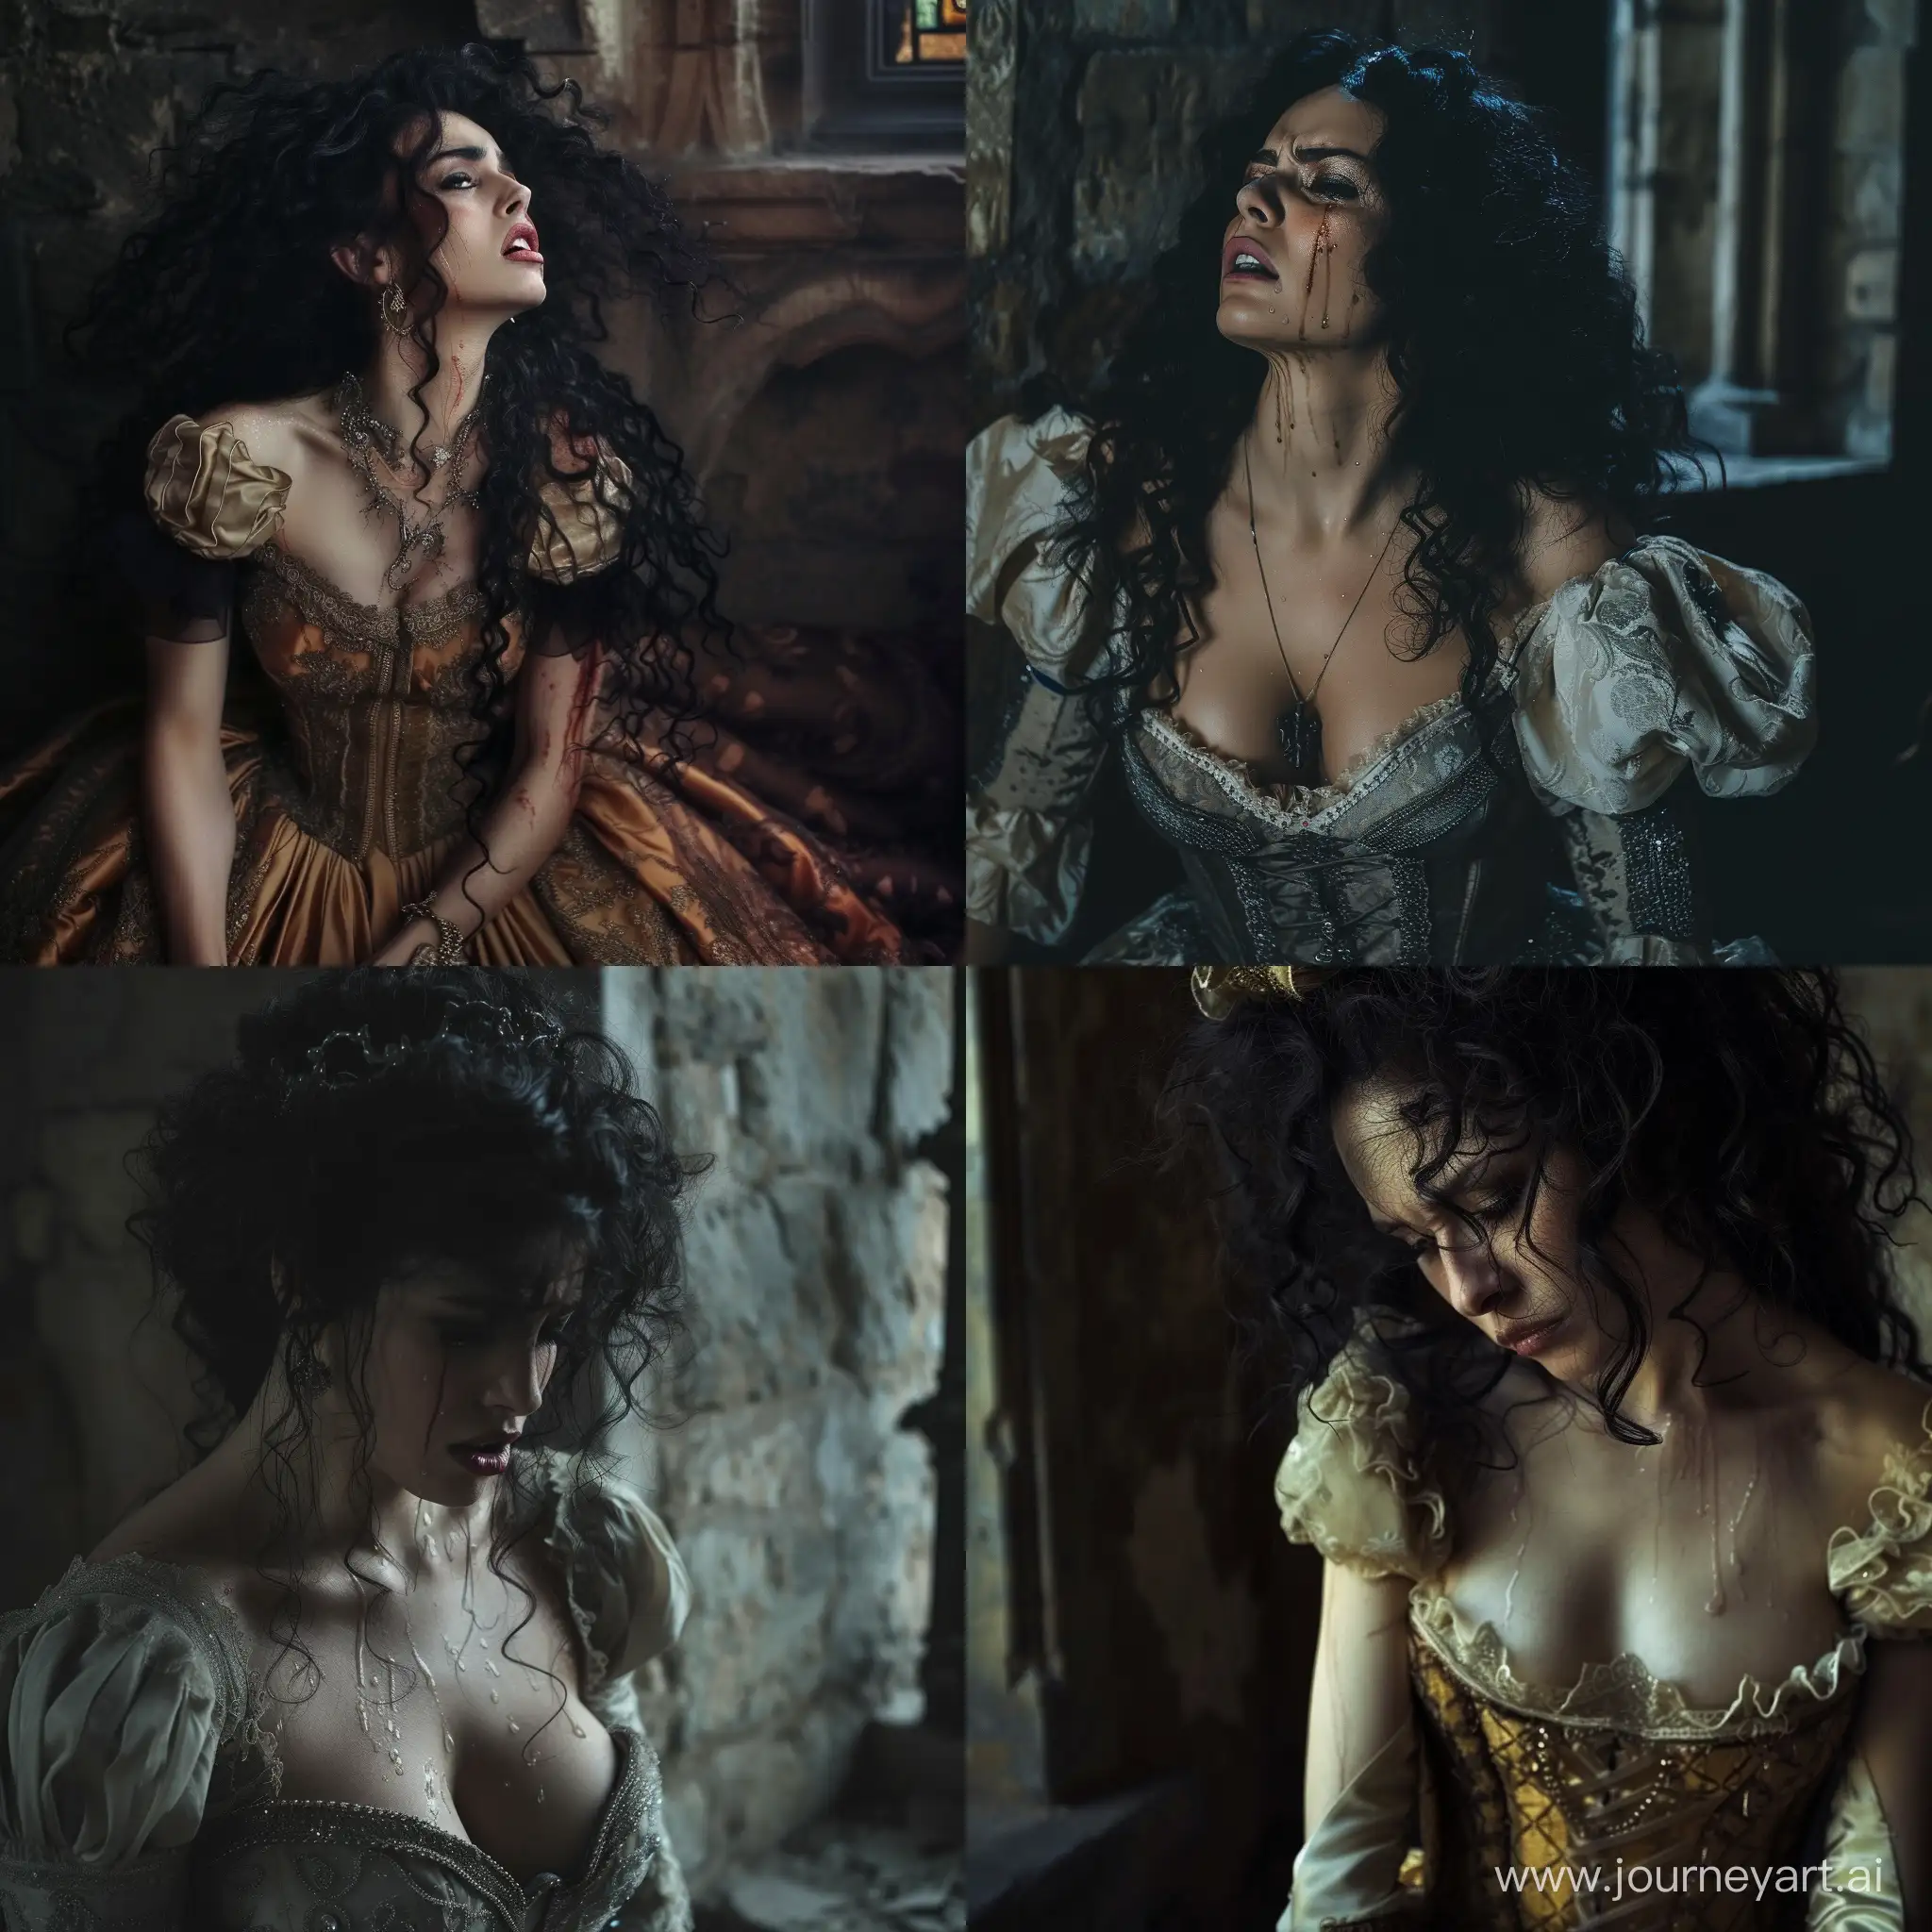 tormented woman with black curls in a beautiful dress, castle chamber, crying, fantasy, darkness